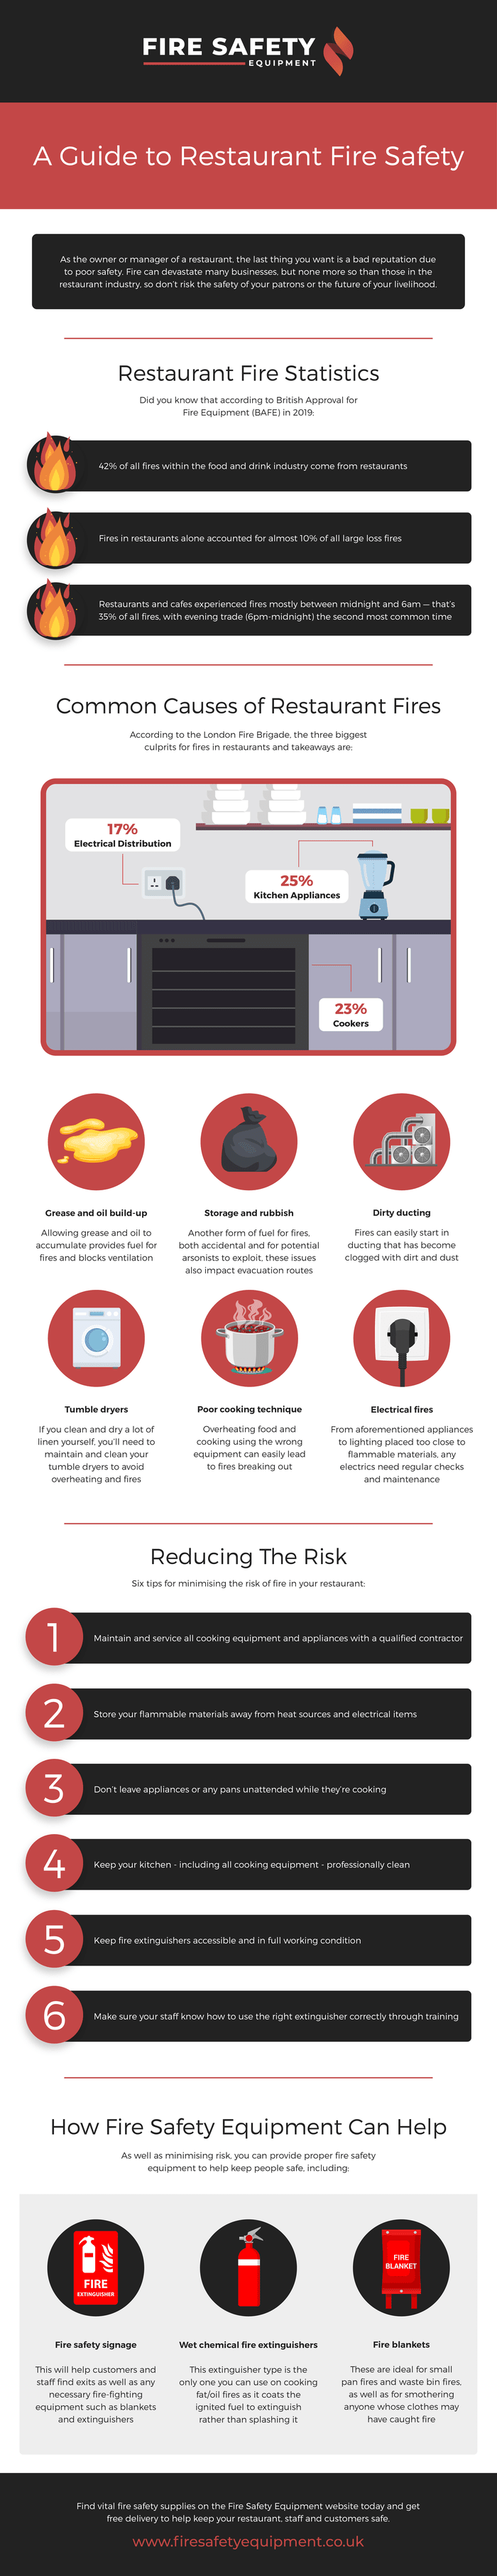 A Guide to Restaurant Fire Safety Infographic